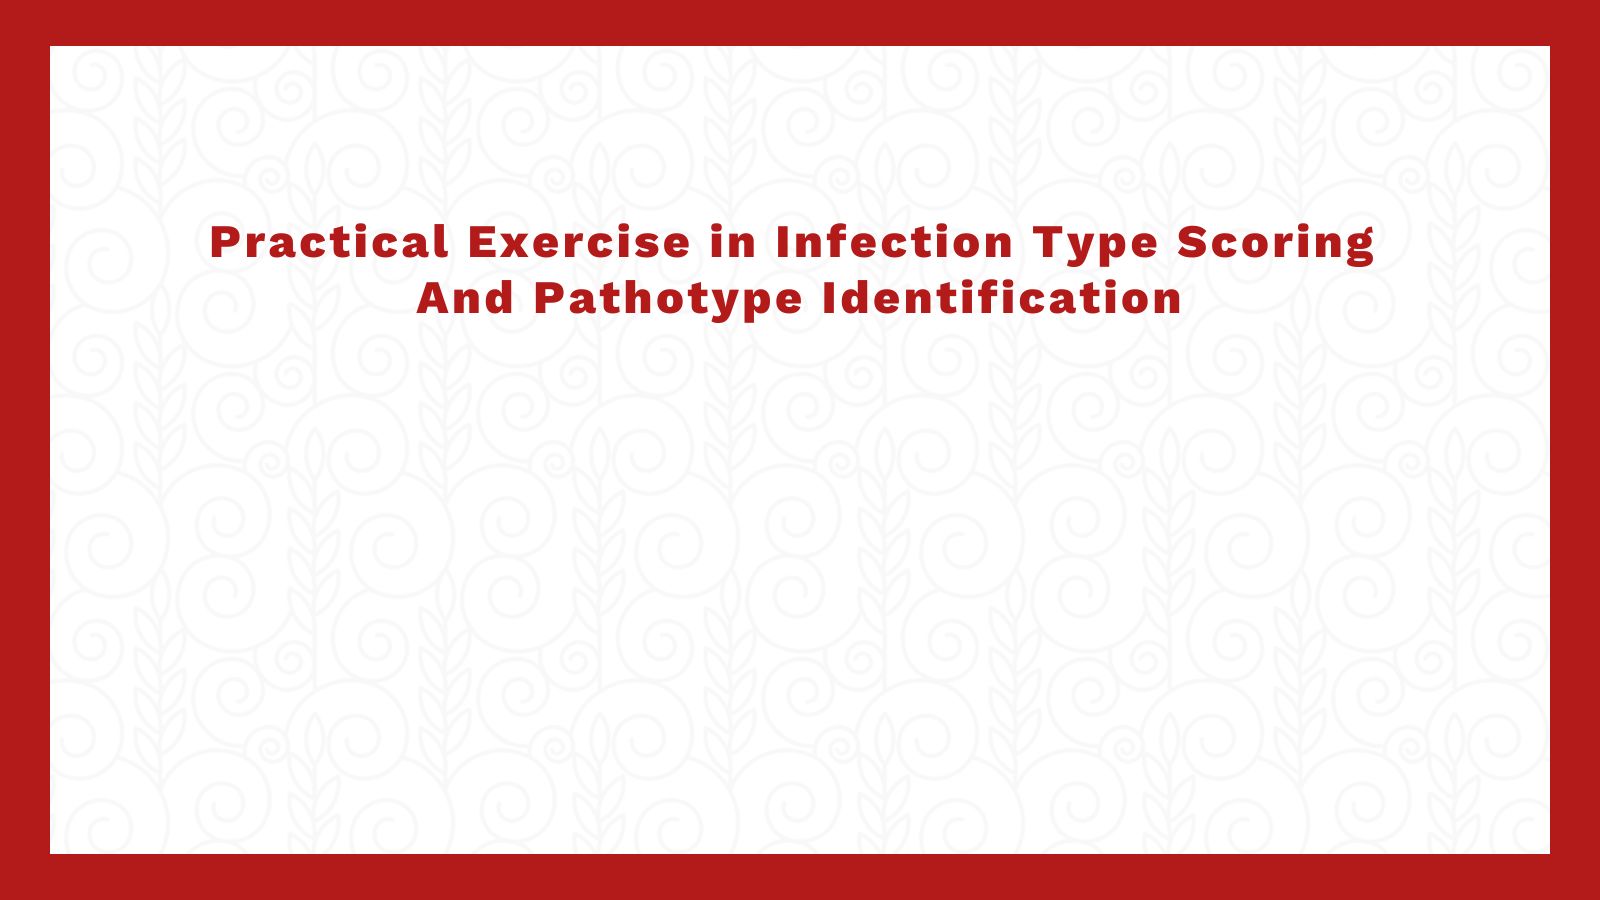 Practical Exercise in Infection Type Scoring And Pathotype Identification